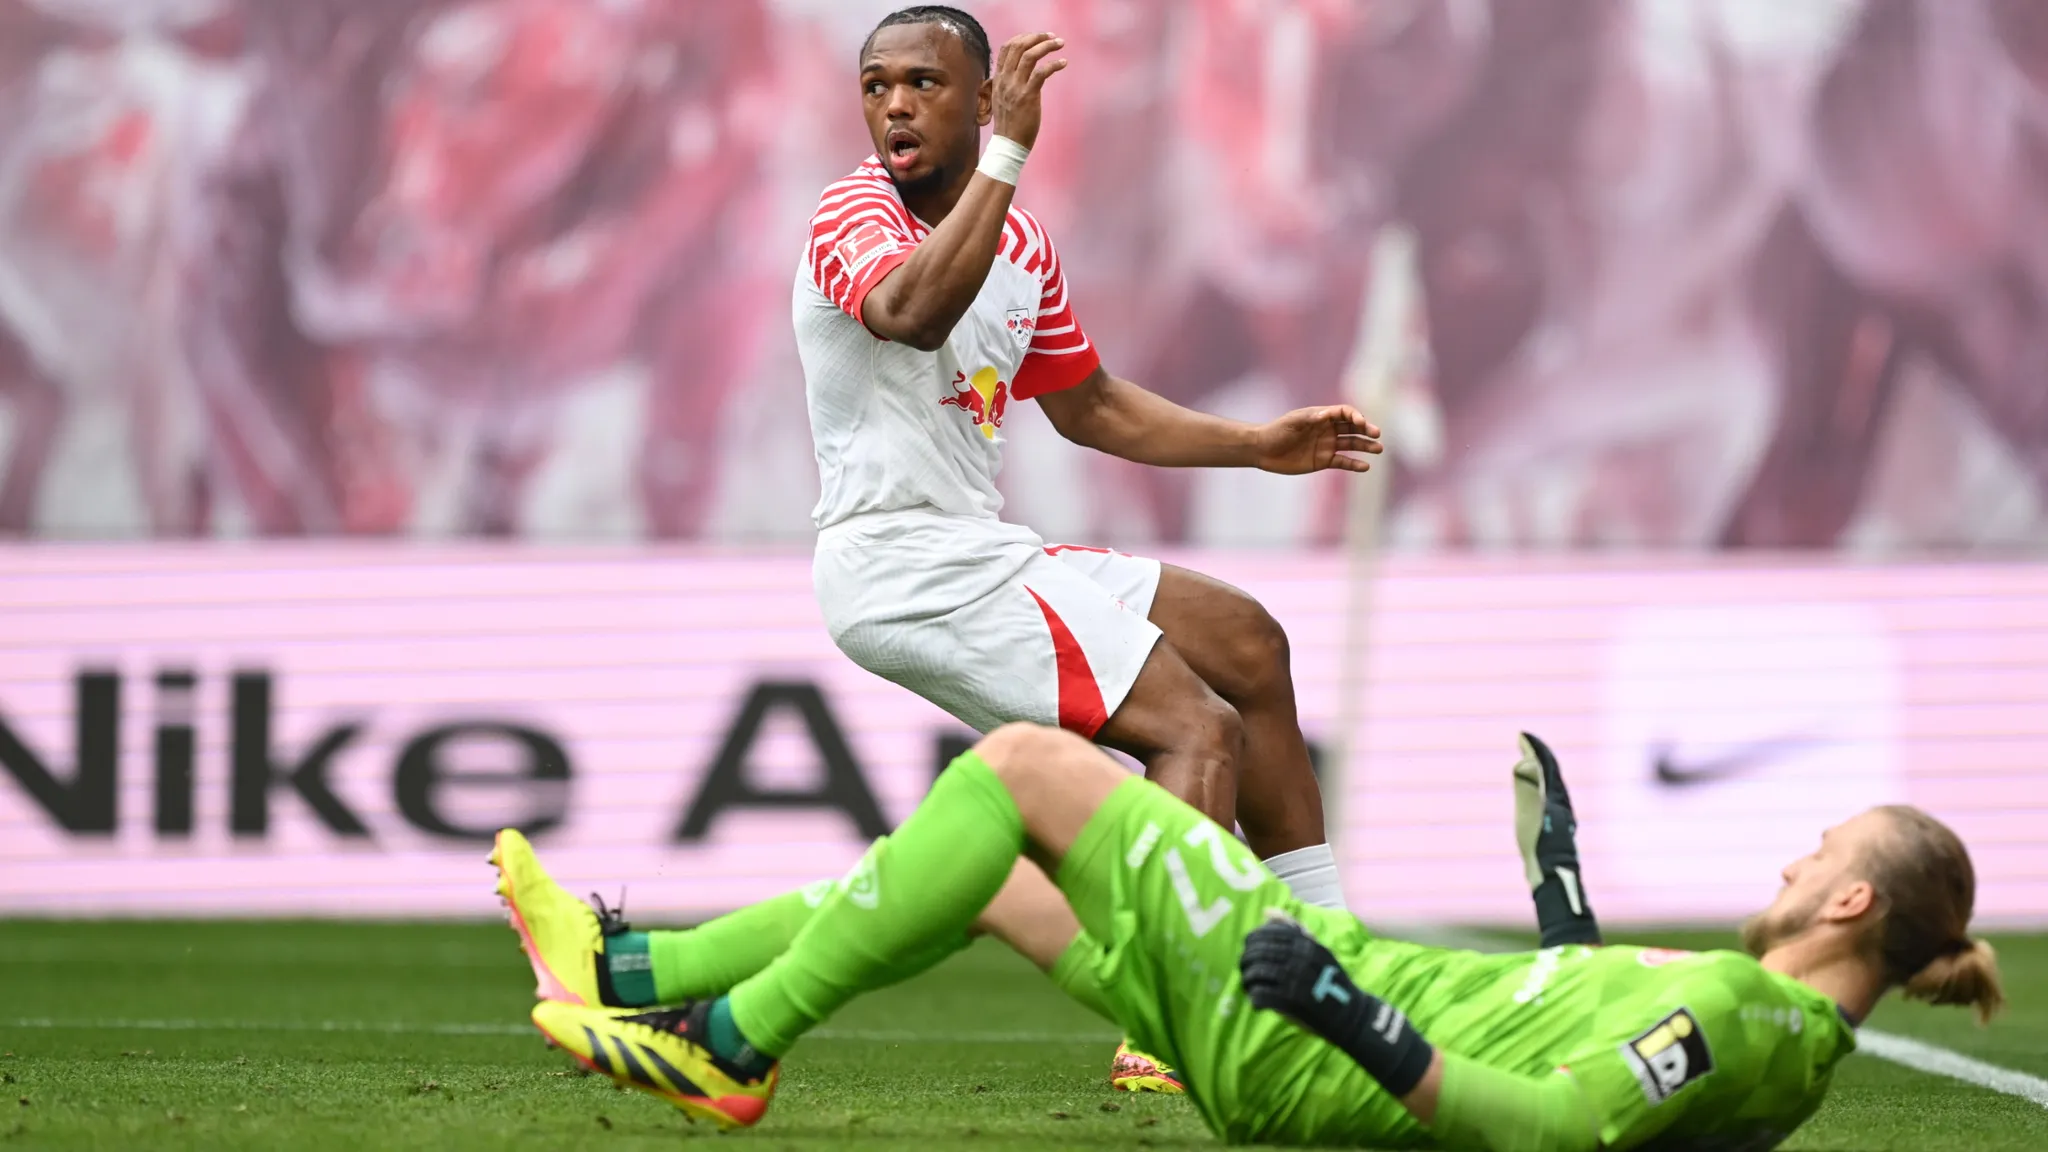 In the first half, Lois Openda had a chance with his head, Mainz keeper Robin Zentner held strong.